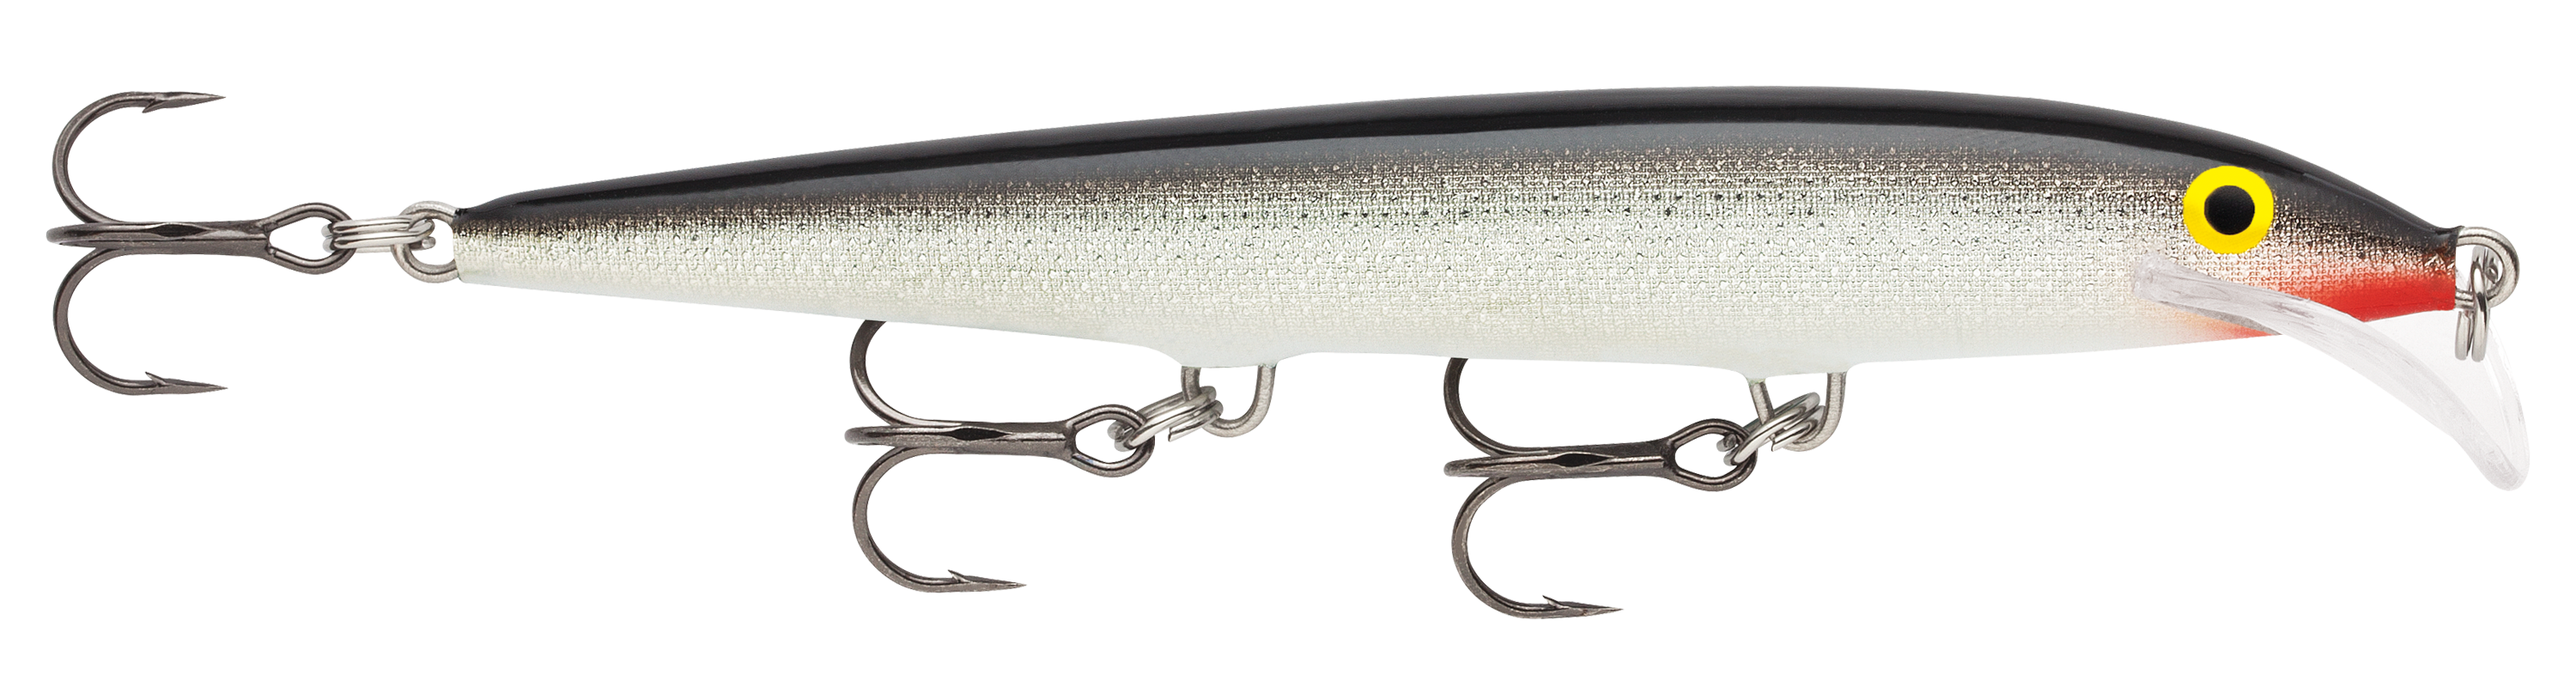 Rapala BX Jointed Minnow Perch